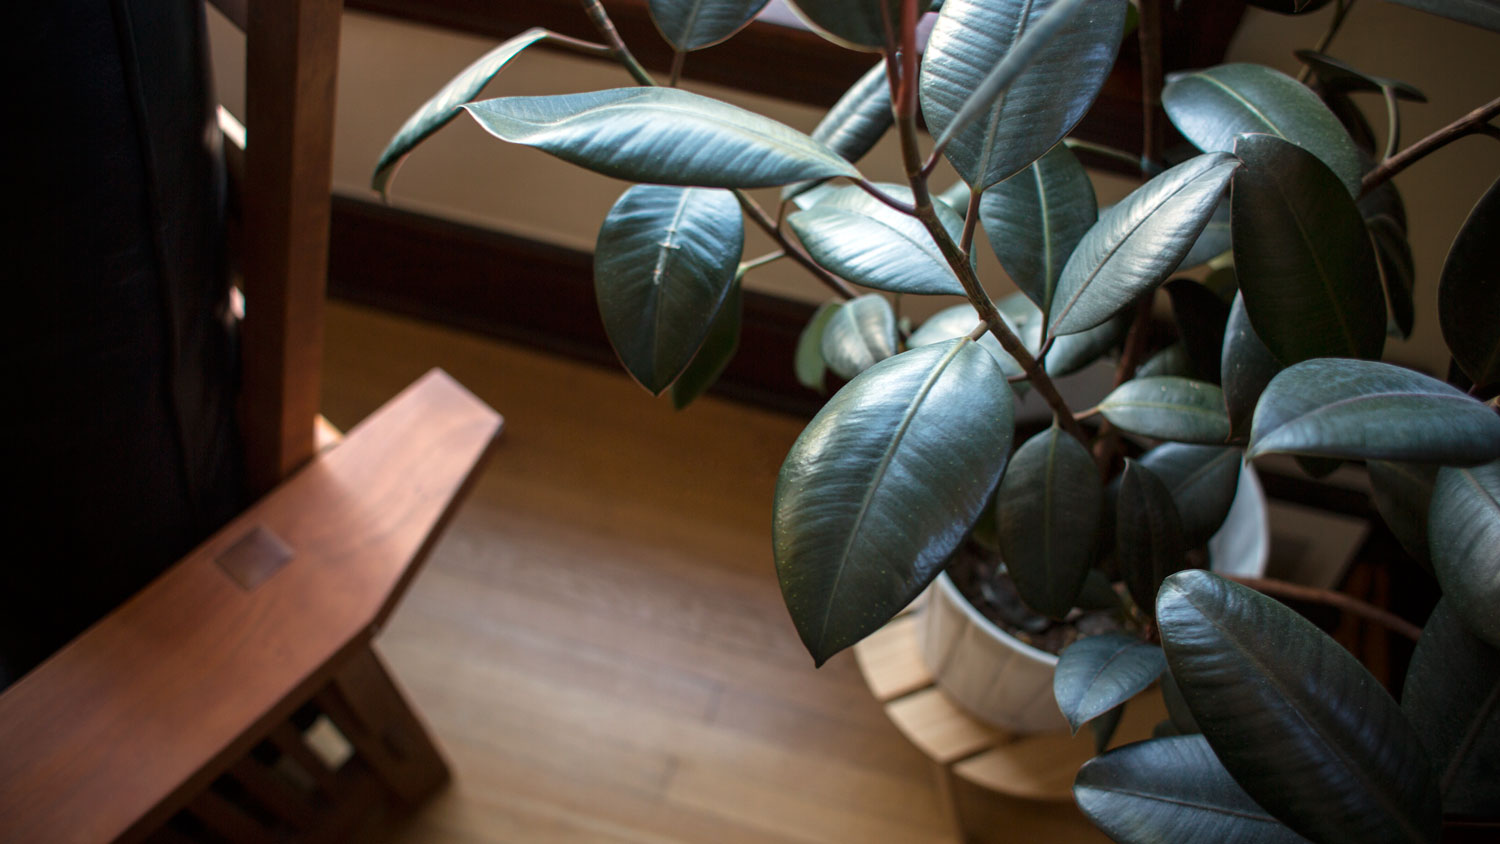 A corner of a chair and a houseplant by a window.